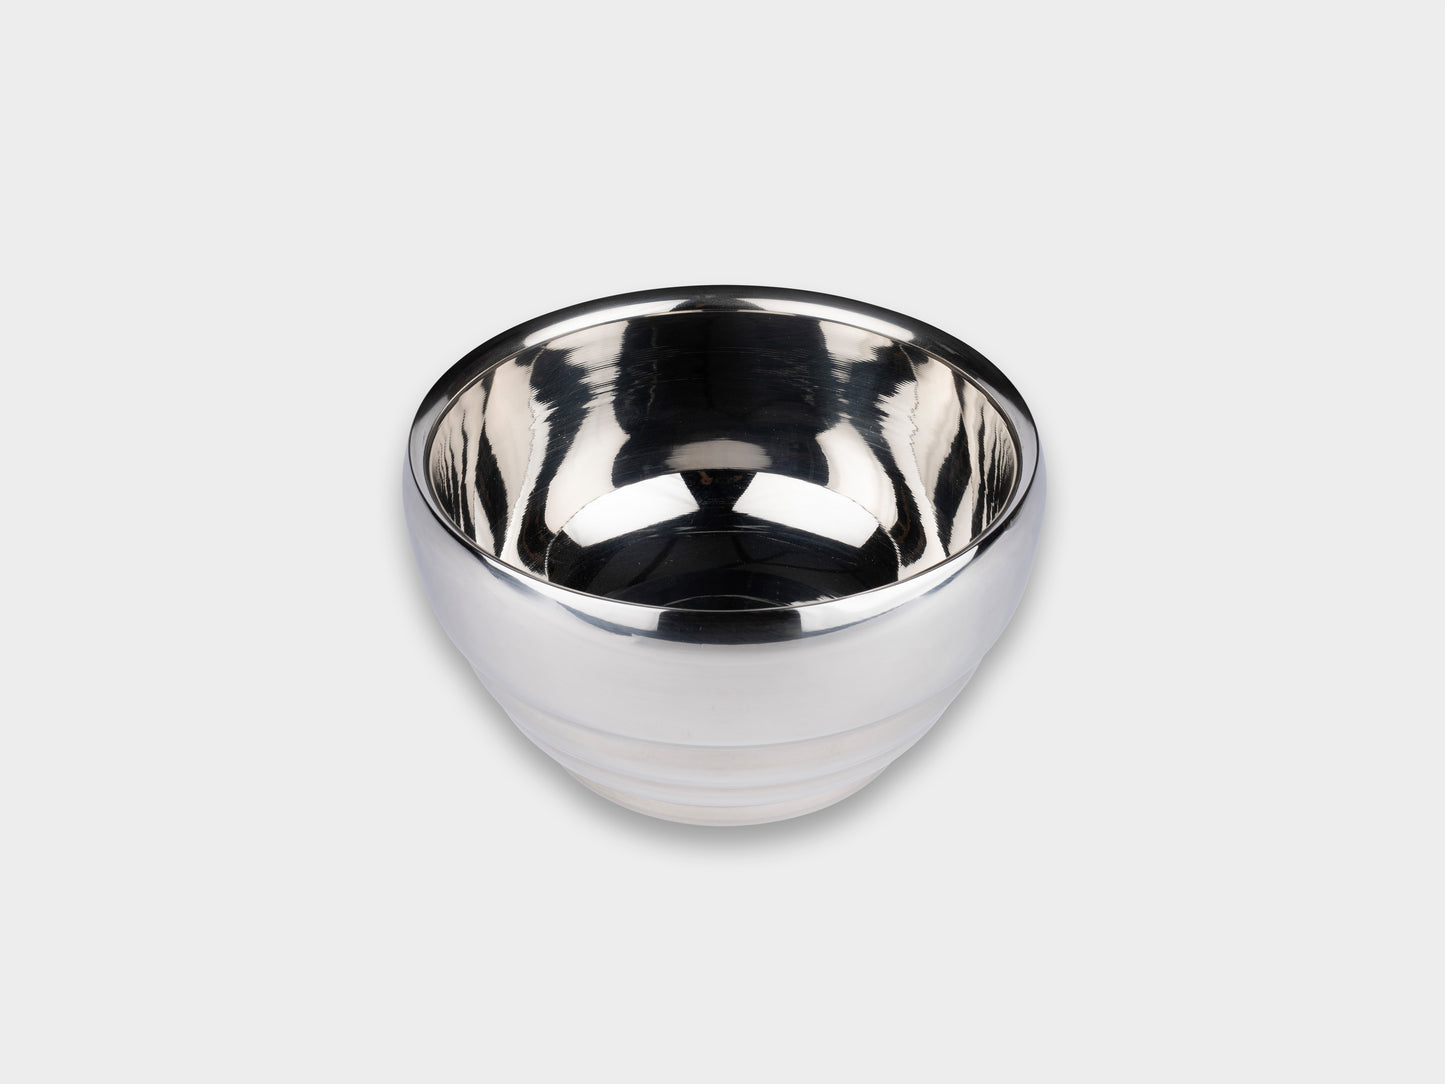 KM Stainless Double Wall Soup Bowl